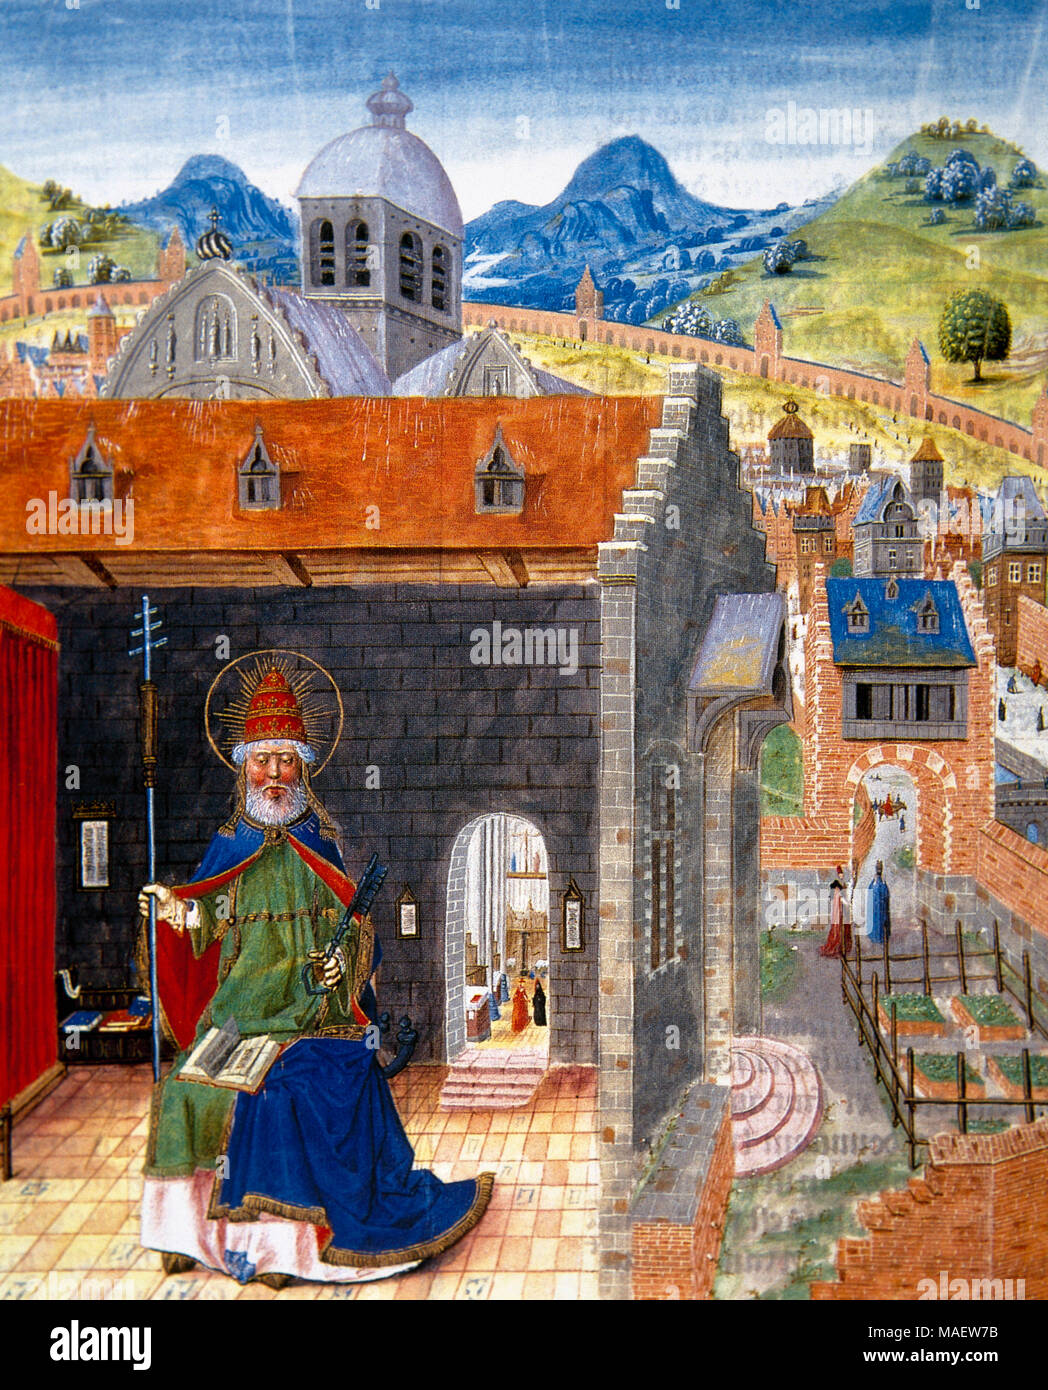 Liber Floridus (Book of Flowers). Medieval encyclopedia, 1090-1120 by Lambert, Canon of Saint-Omer. Miniature depicting Saint Peter and the city of Rome. Manuscript of the15th century. Conde Museum. Chateau of Chantilly. France. Stock Photo